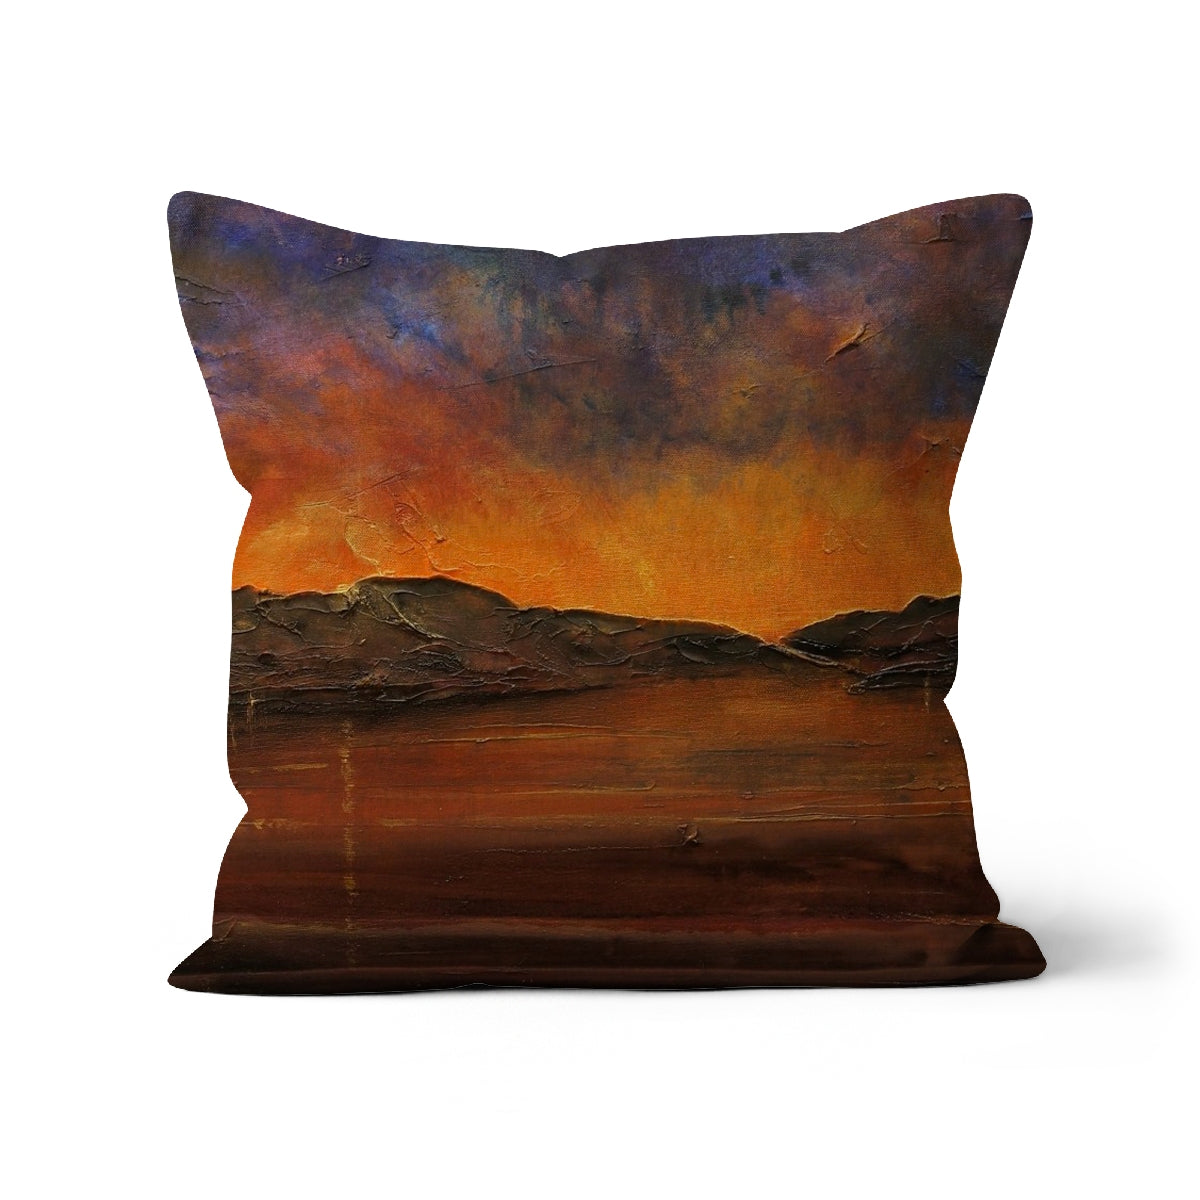 A Brooding Clyde Dusk Art Gifts Cushion-Cushions-River Clyde Art Gallery-Faux Suede-12"x12"-Paintings, Prints, Homeware, Art Gifts From Scotland By Scottish Artist Kevin Hunter